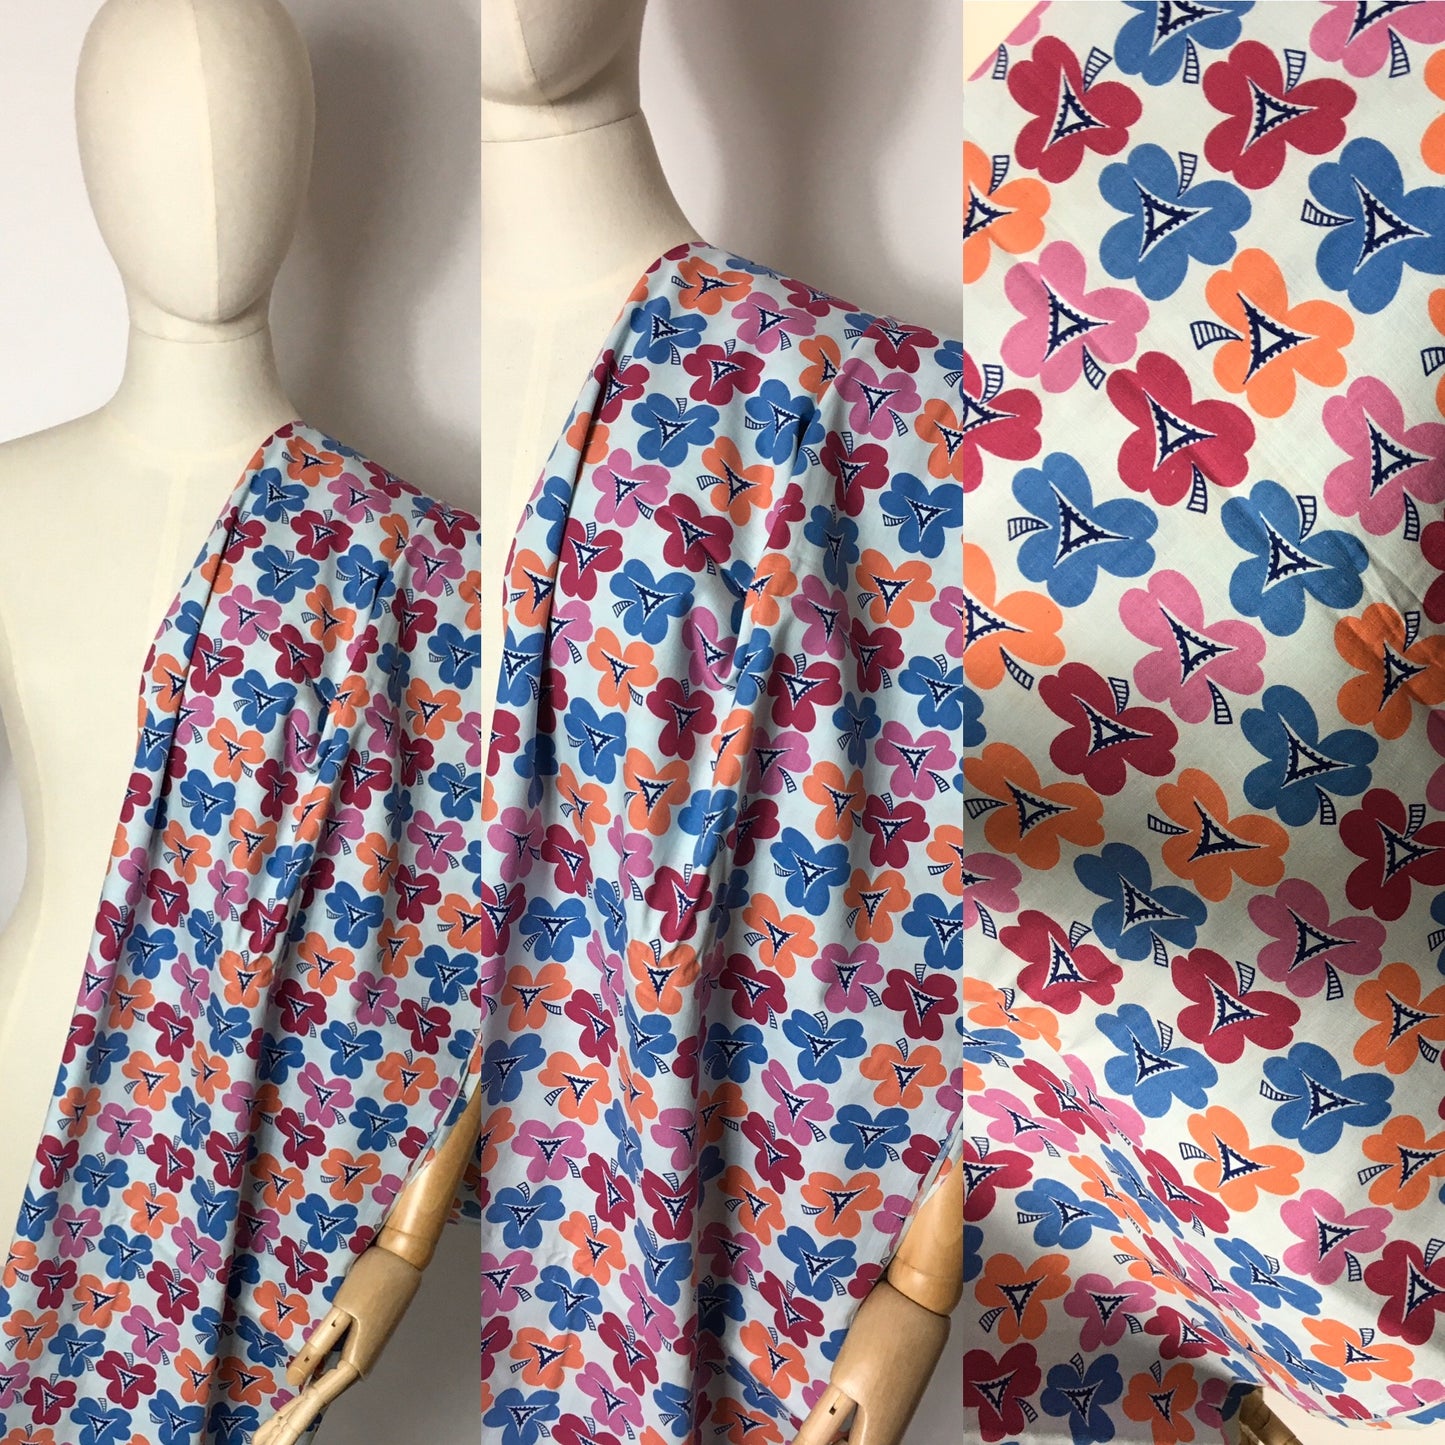 Original 1950s Cotton Novelty Dress Fabric - Featuring Clovers / Windmill Pattern in Bright Oranges, Pinks and Blues